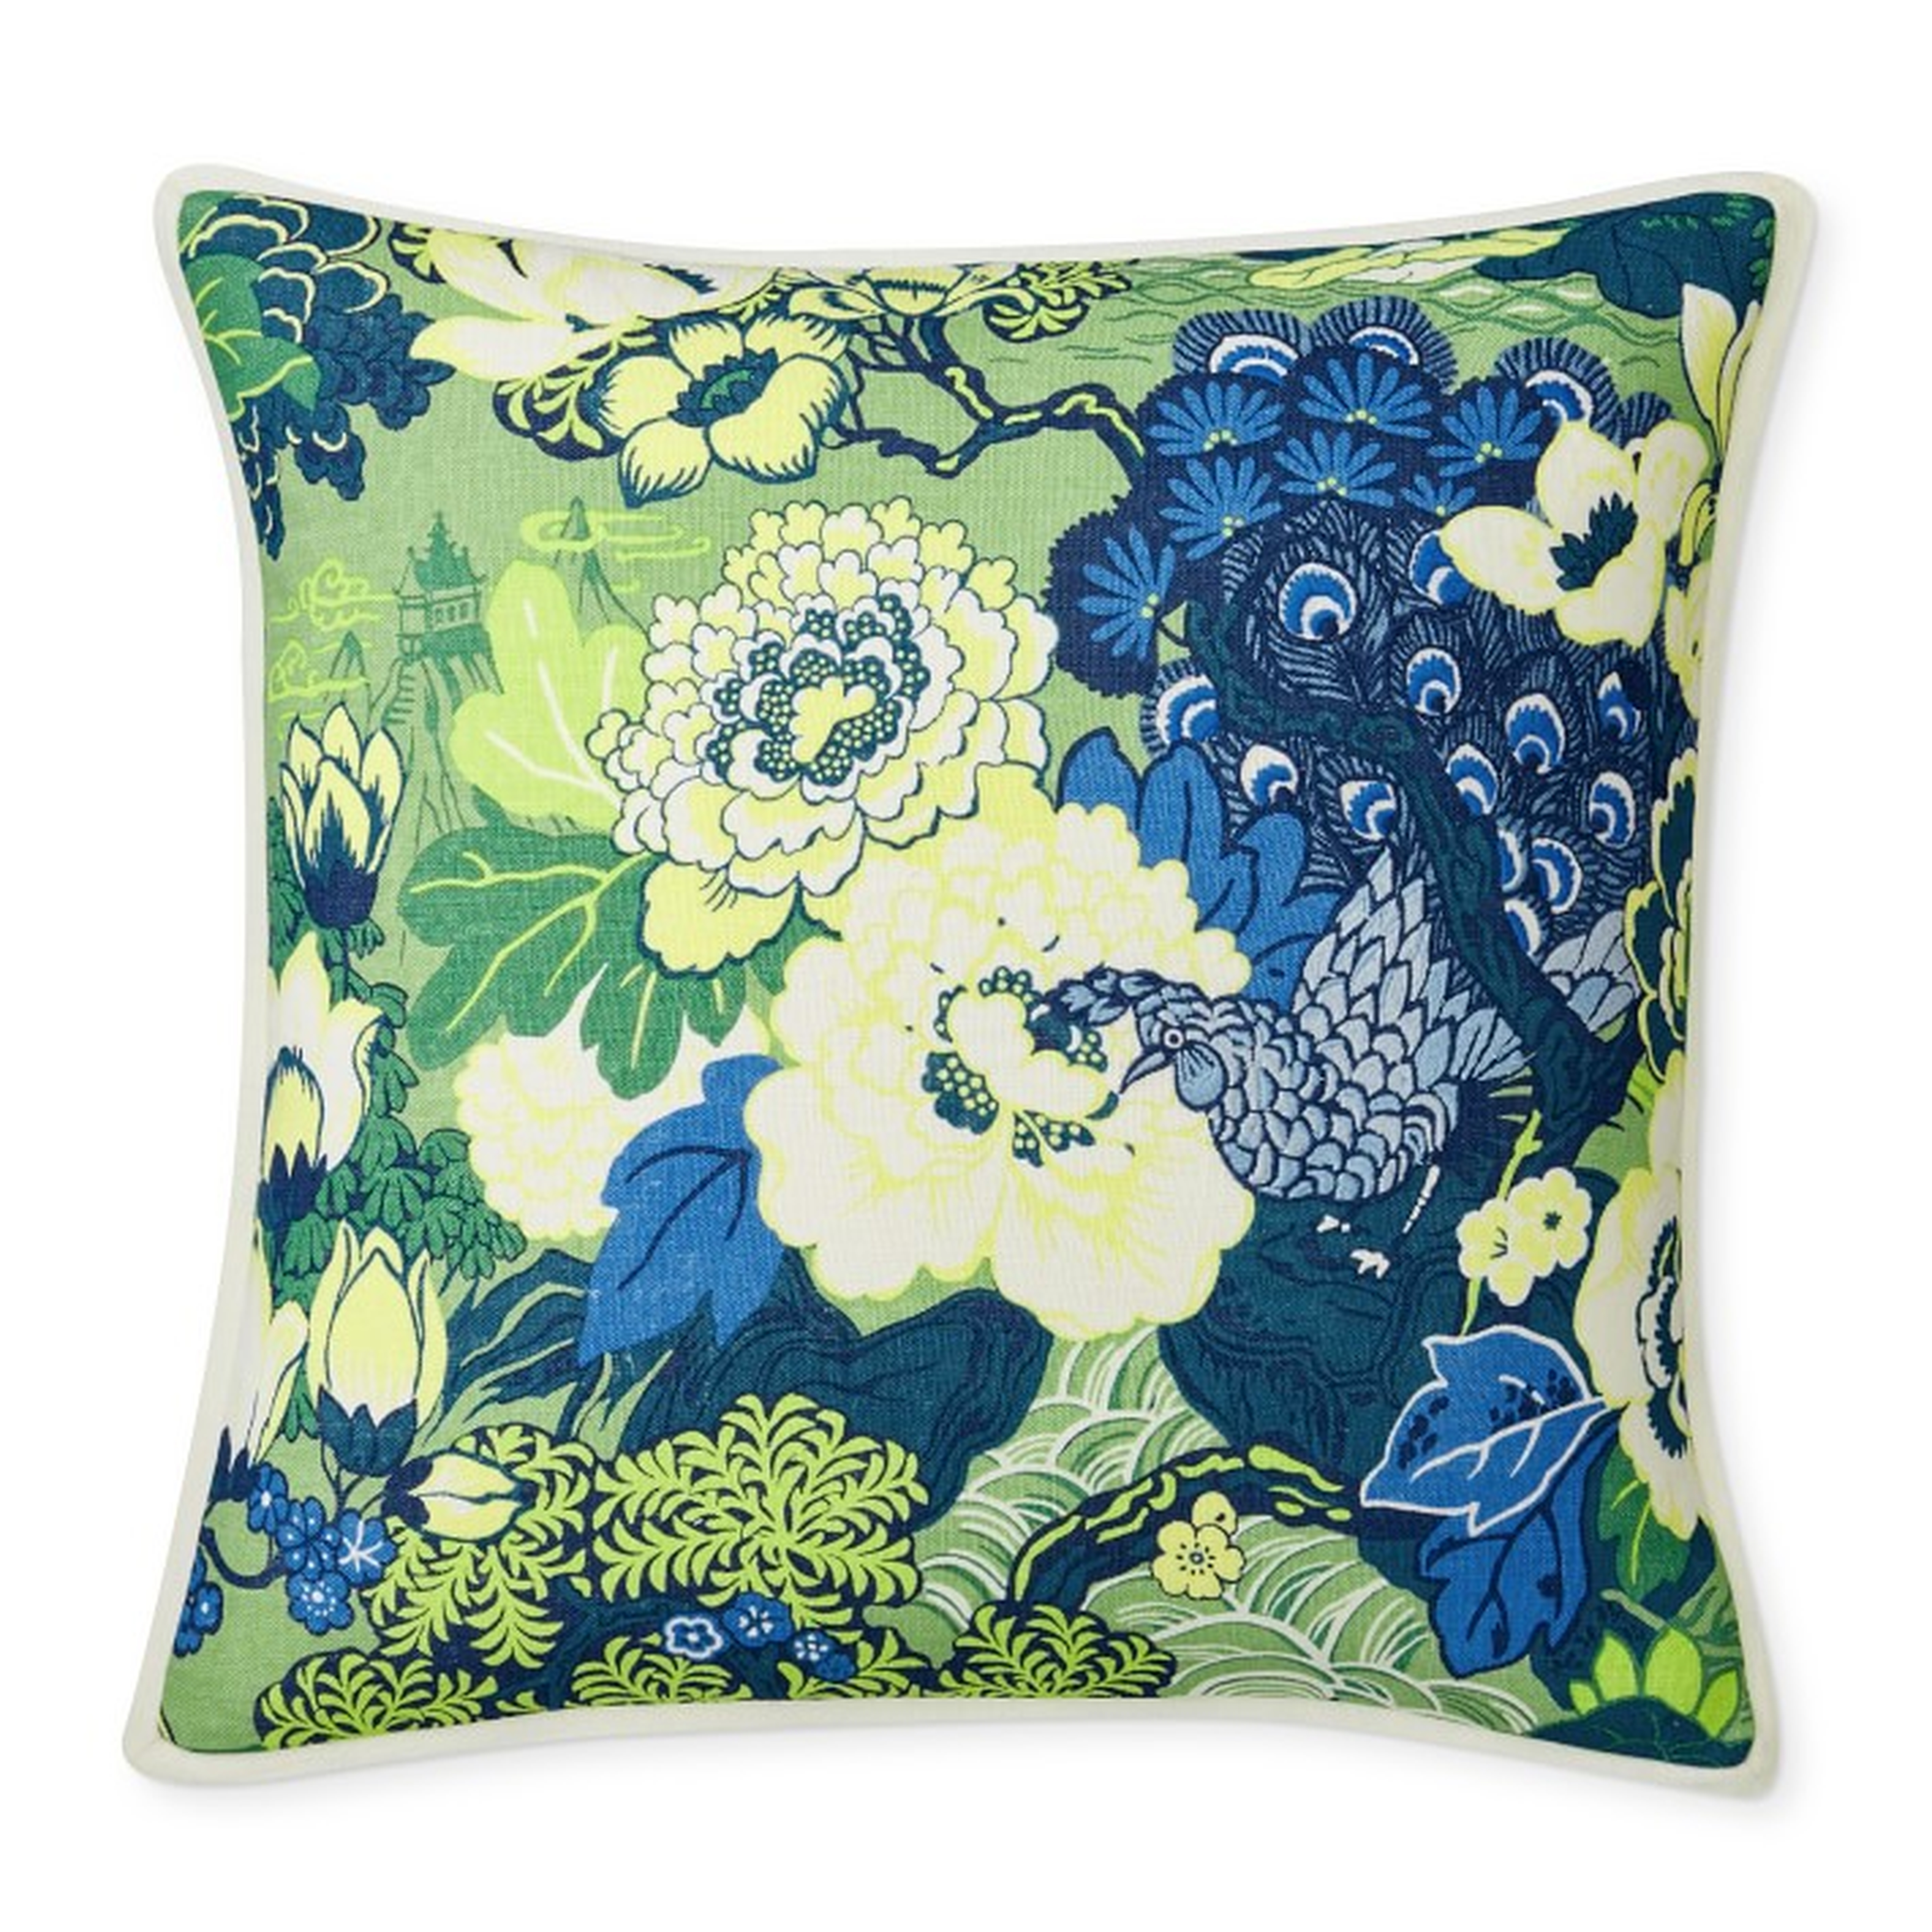 Schumacher Peacock Printed And Embroidered Pillow Cover - Williams Sonoma